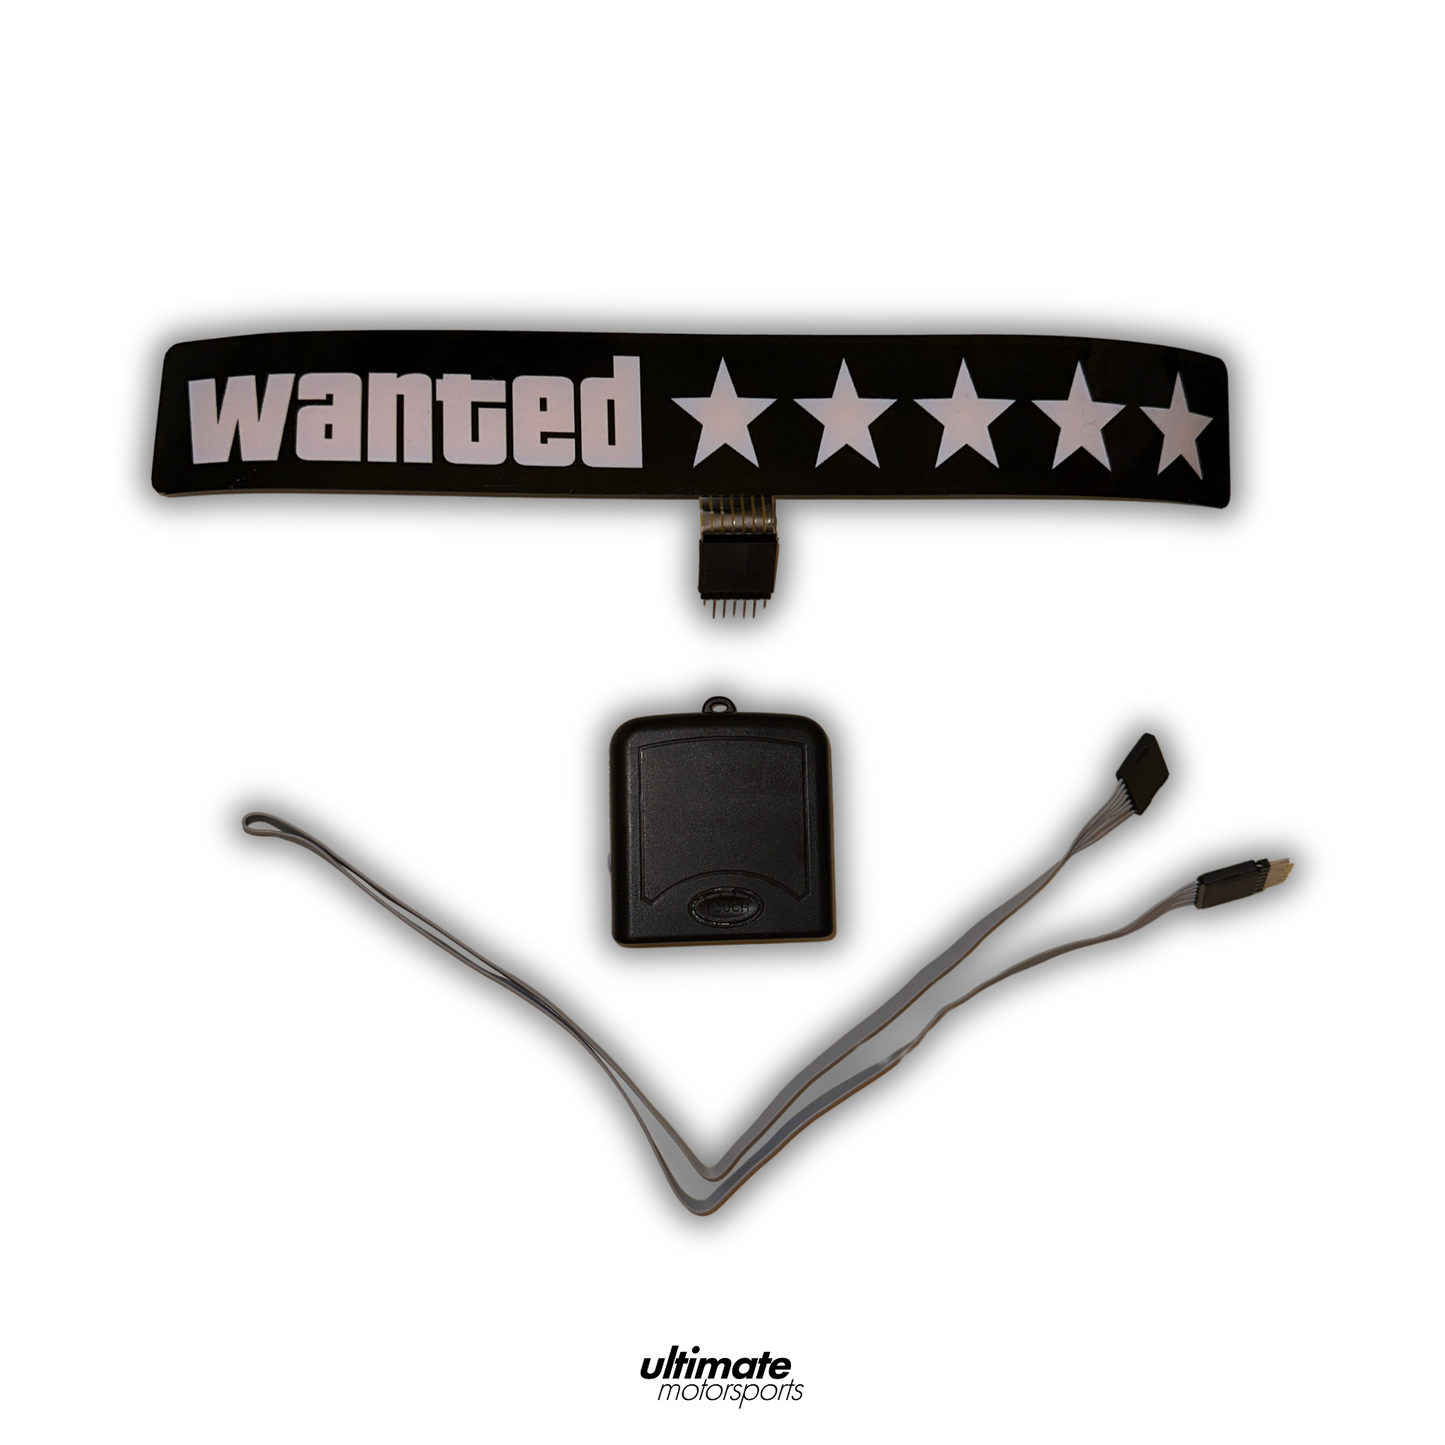 Wanted LED Sticker